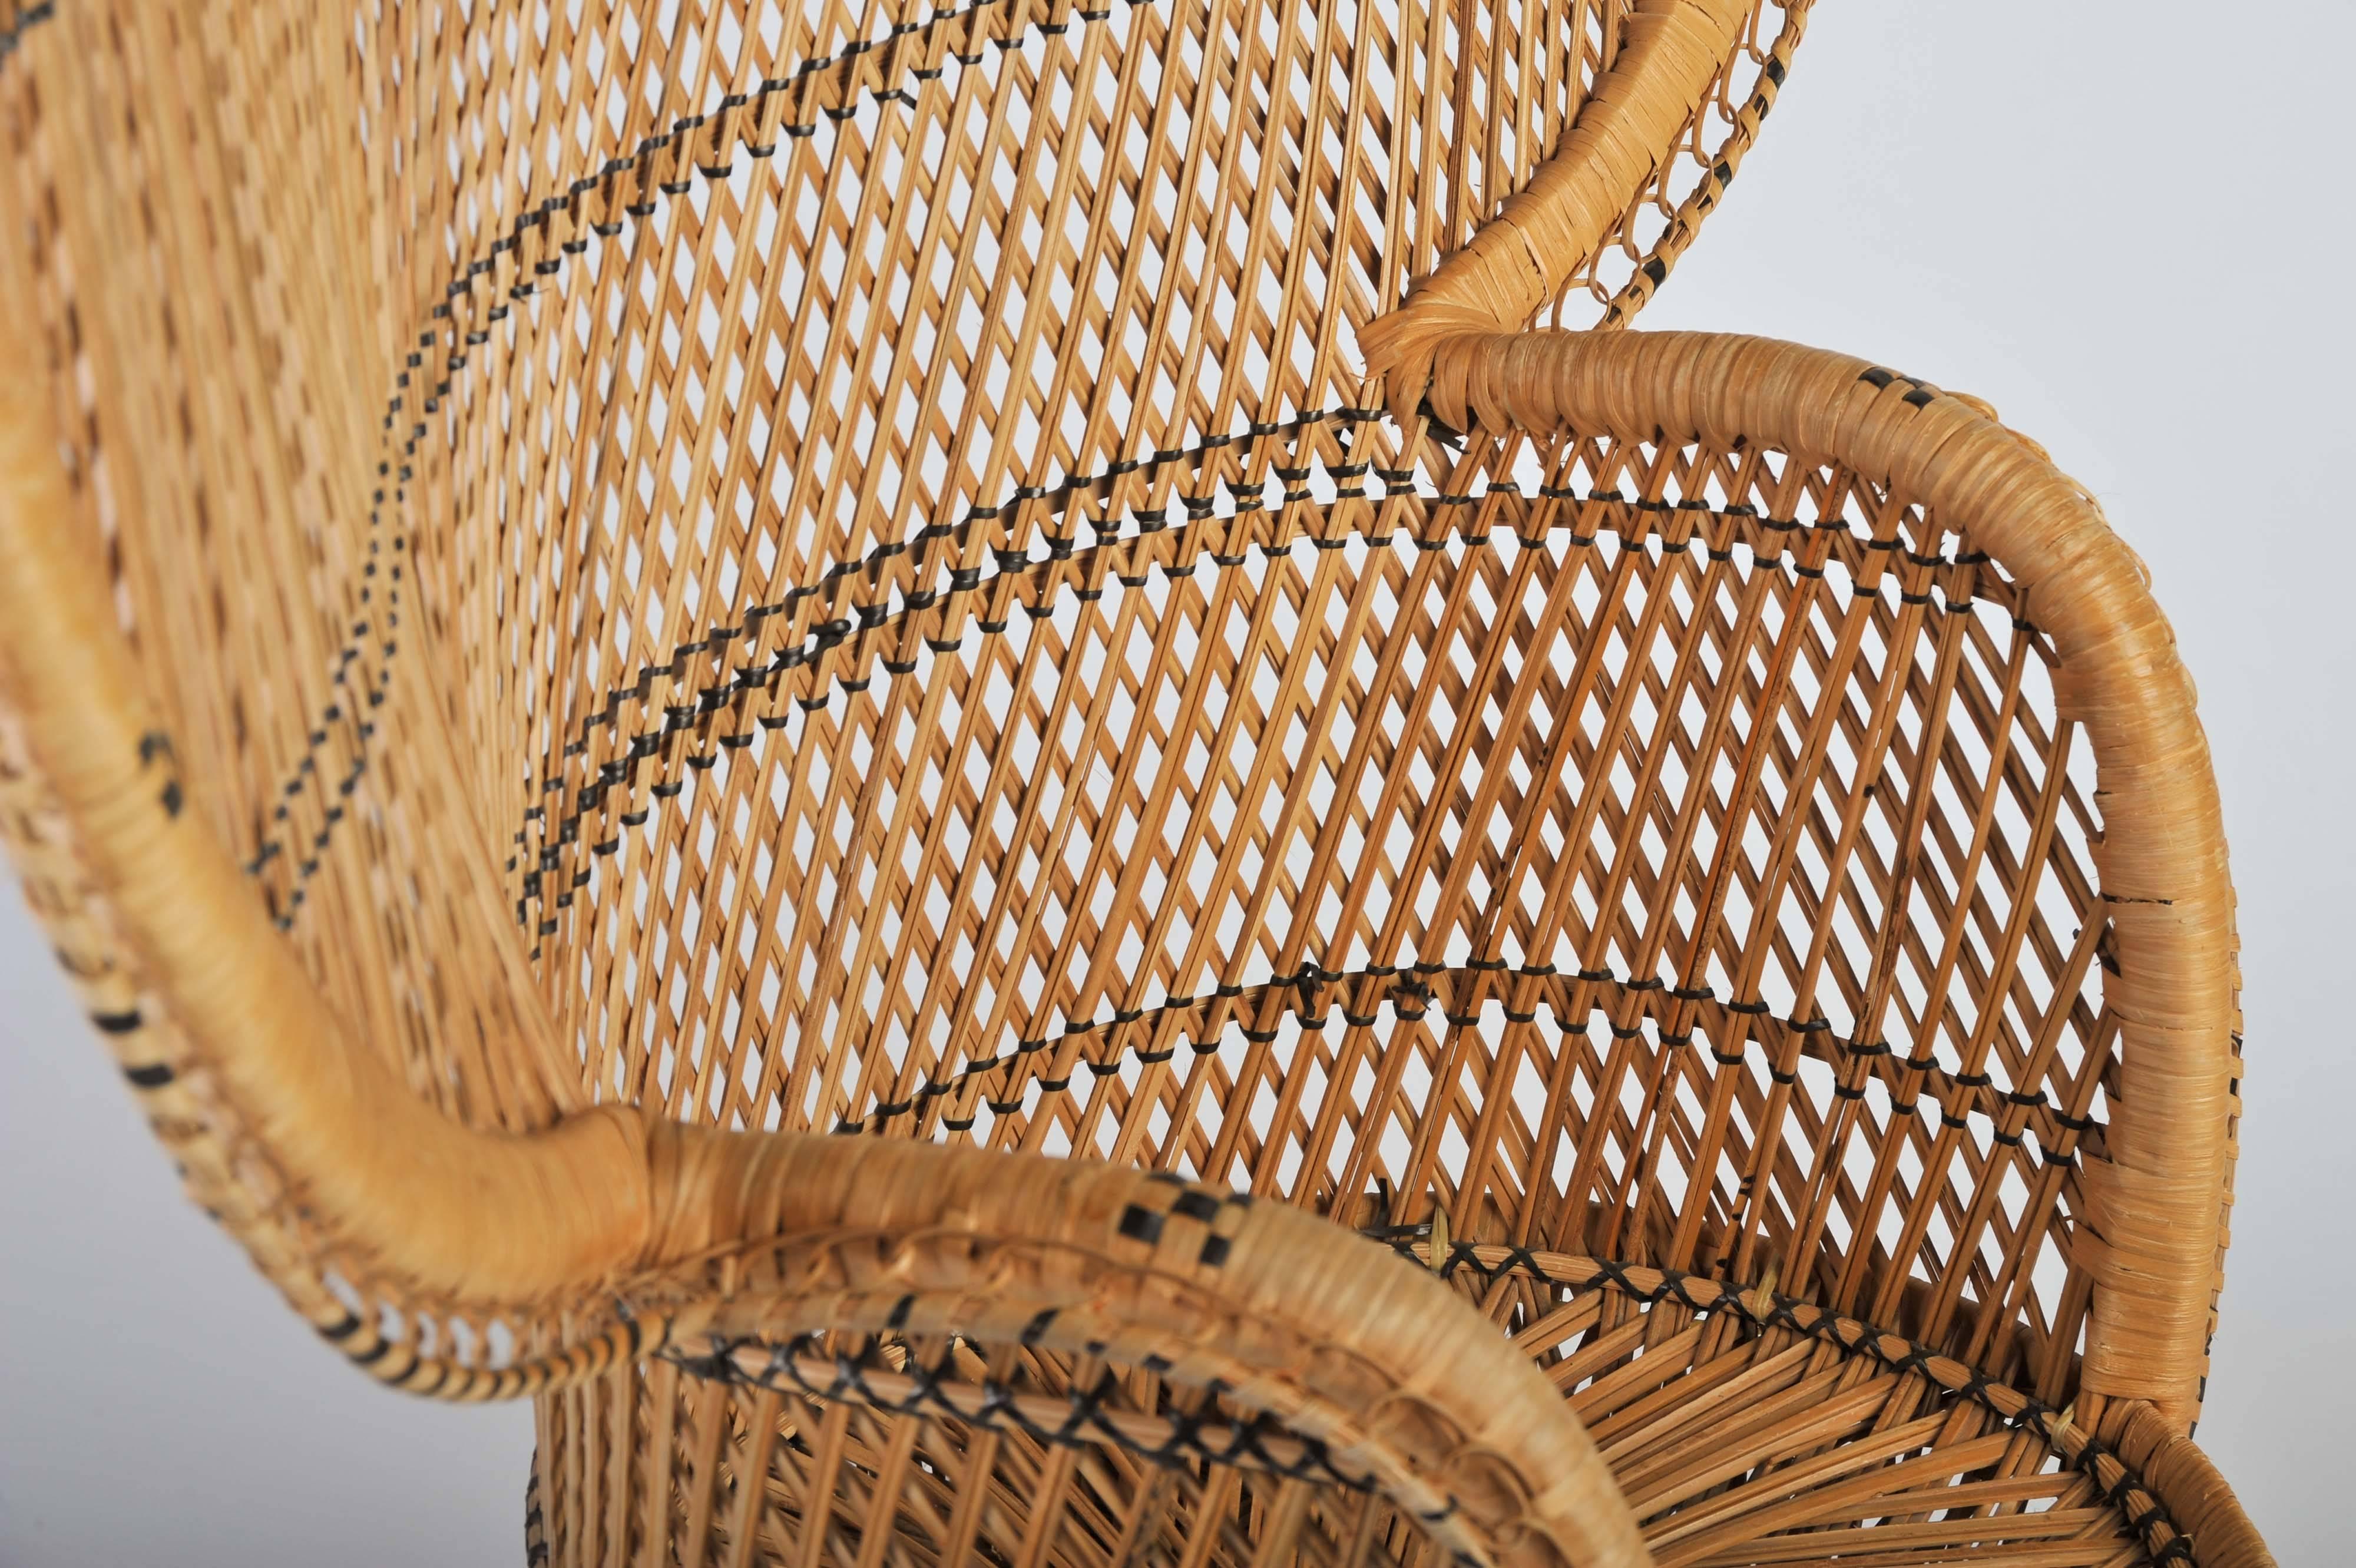 Late 20th Century Large Vintage Bohemian 1970s Wicker Emmanuel/Peacock Chair  For Sale